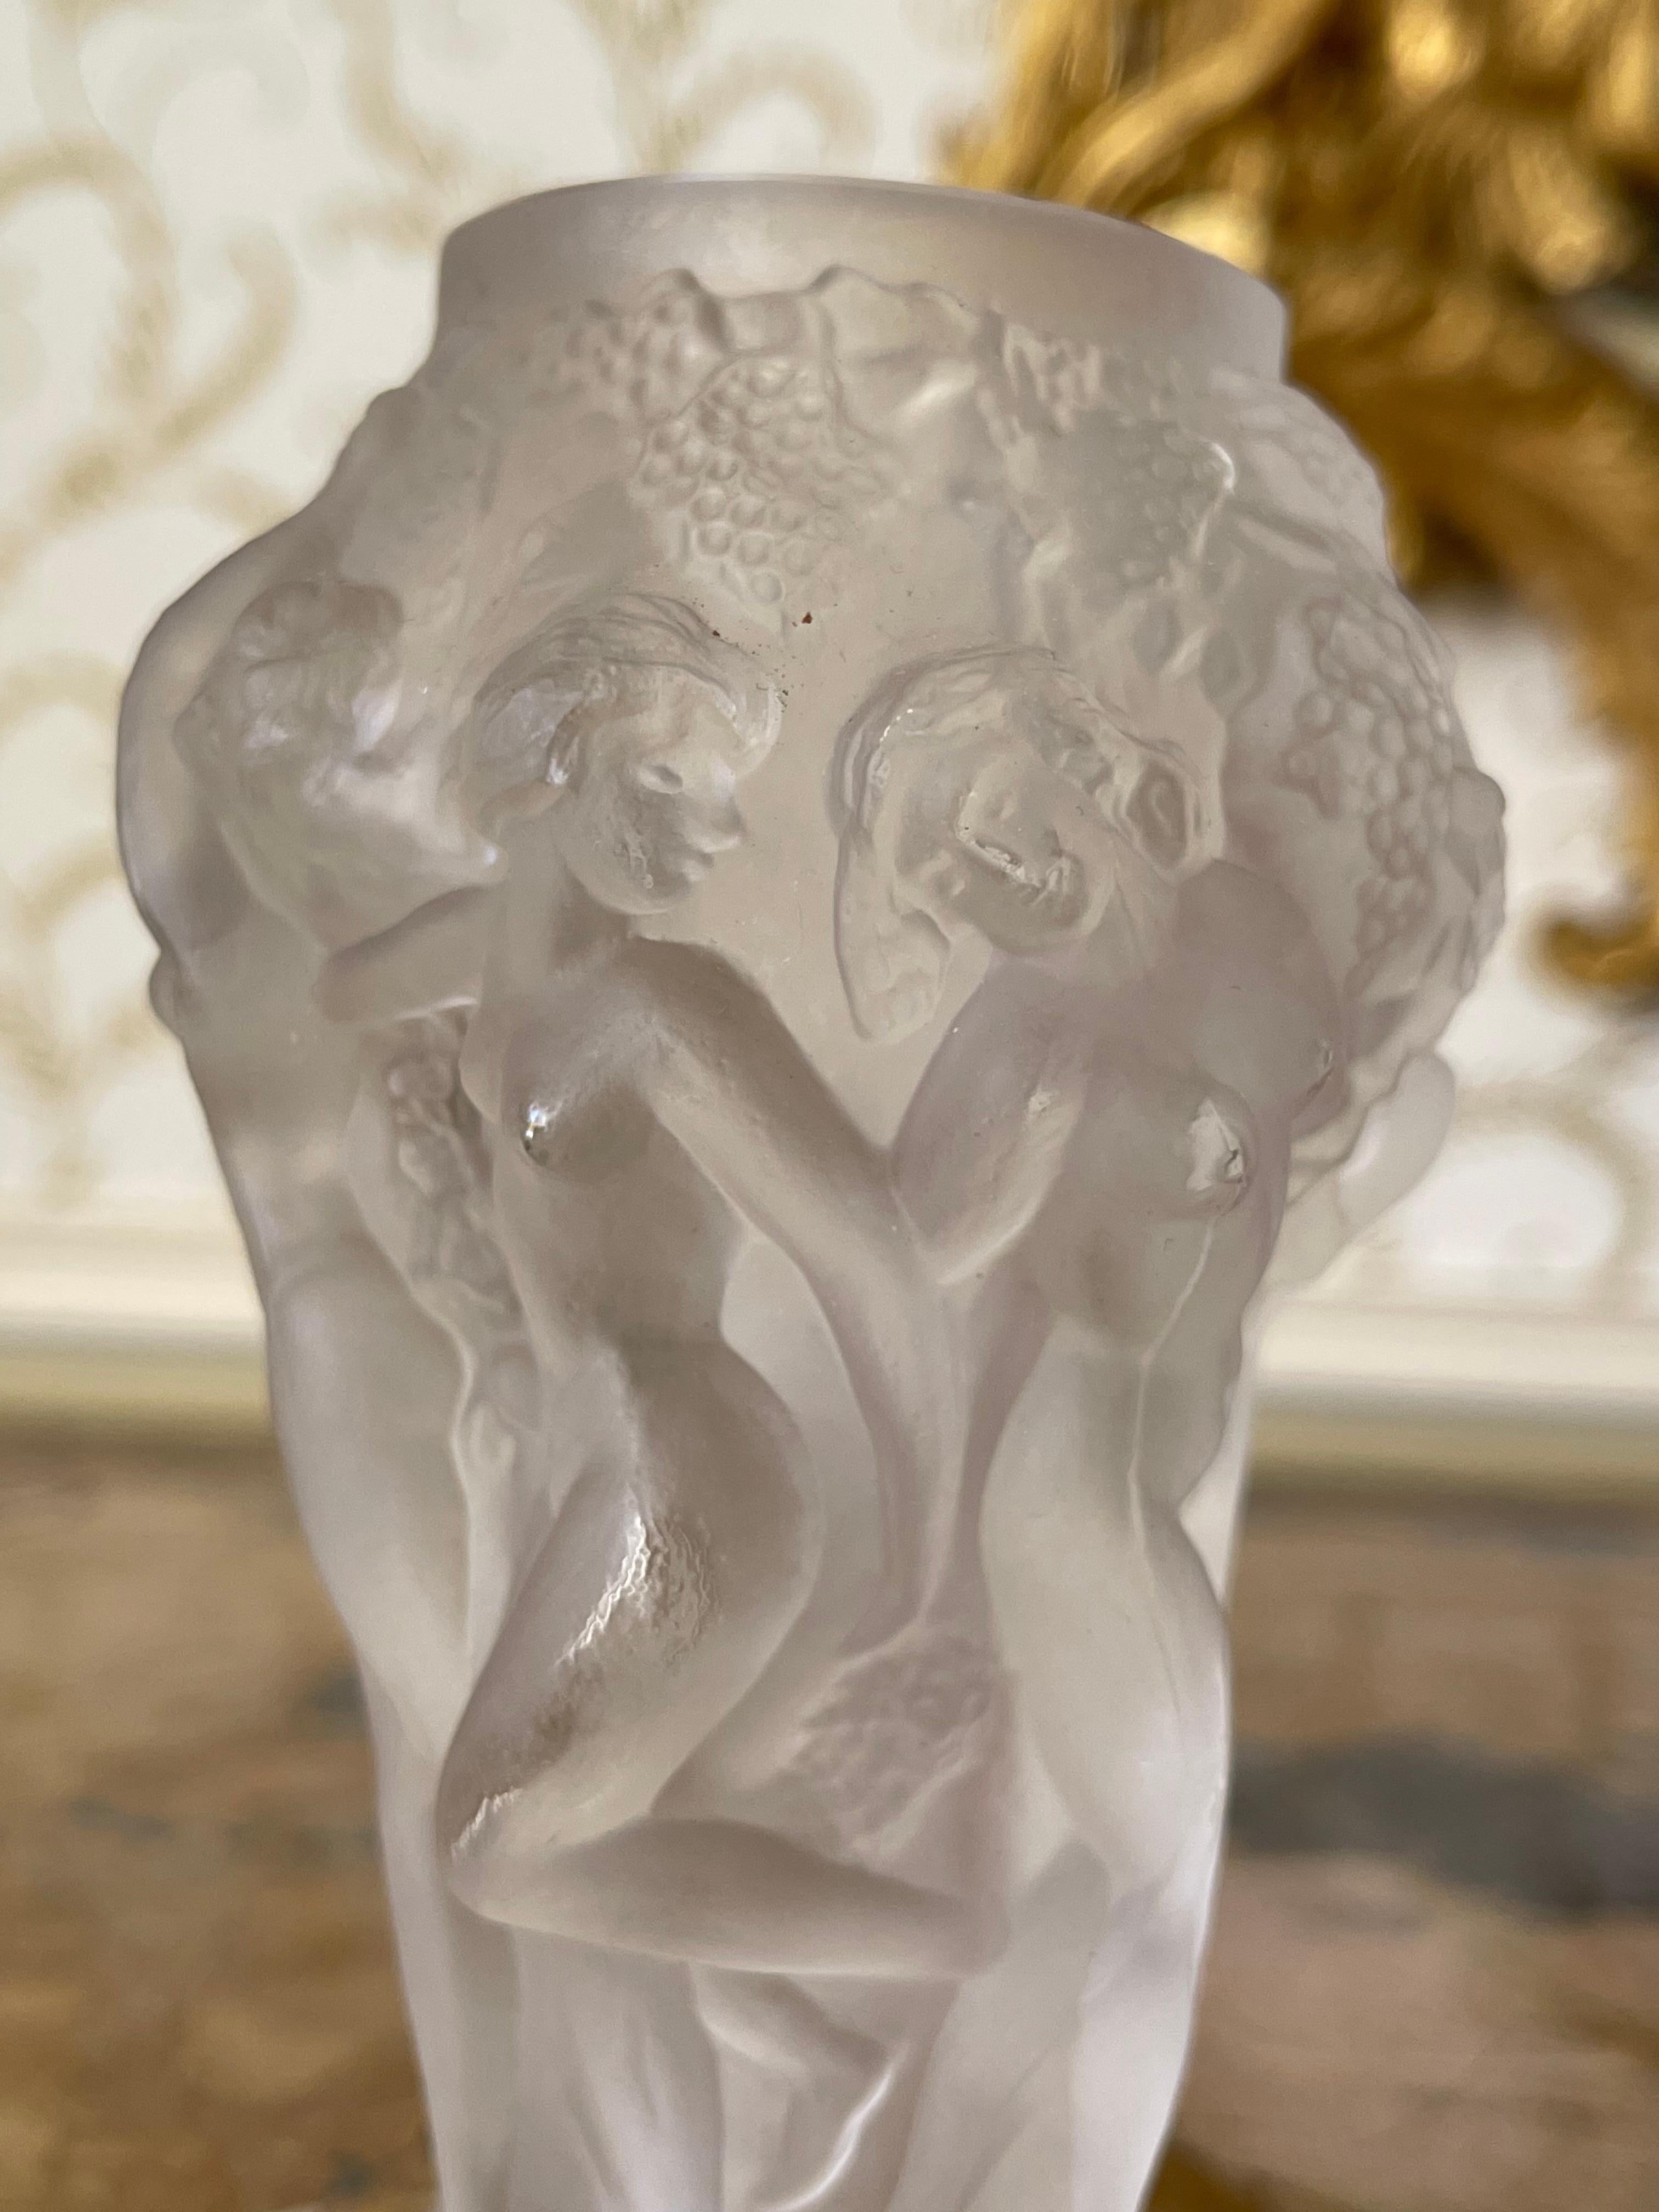 Small pressed and satin molded glass vase with relief decoration of a round of bacchantes with vine branches. The base is circular with canted sides. It is not signed and in very good condition.